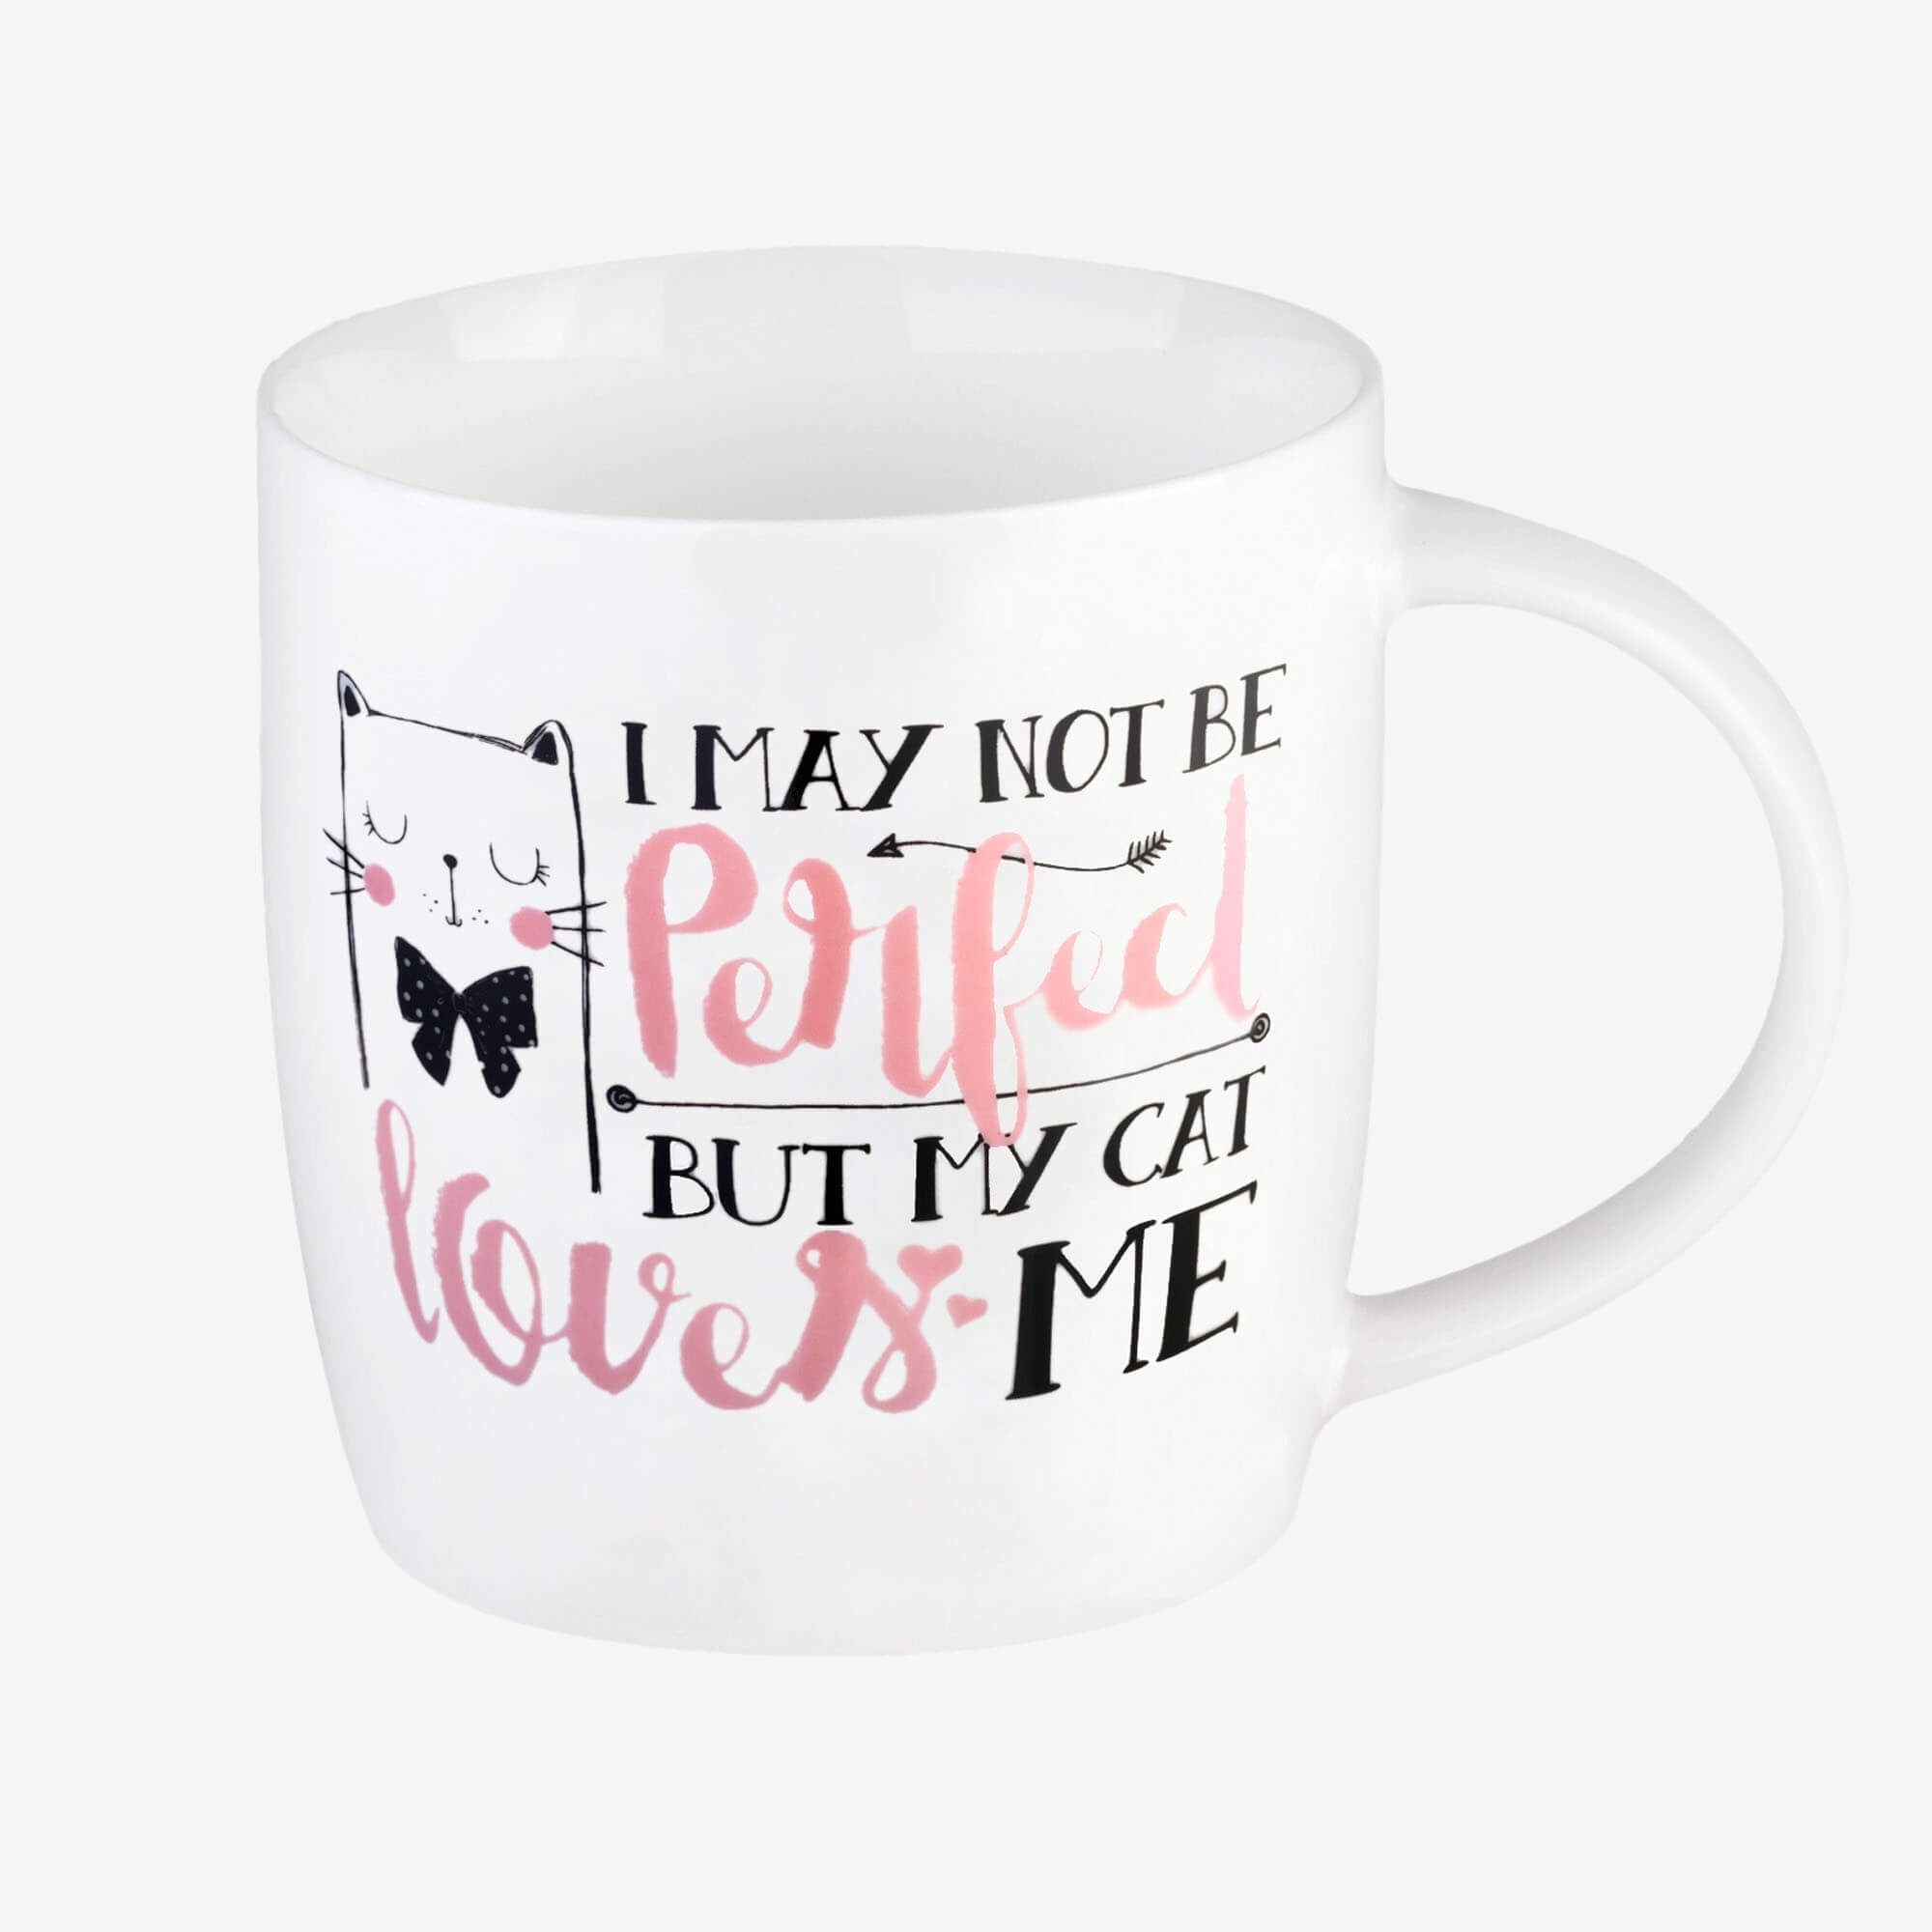 I may not be perfect but my cat loves me - Mug en porcelaine Legami 